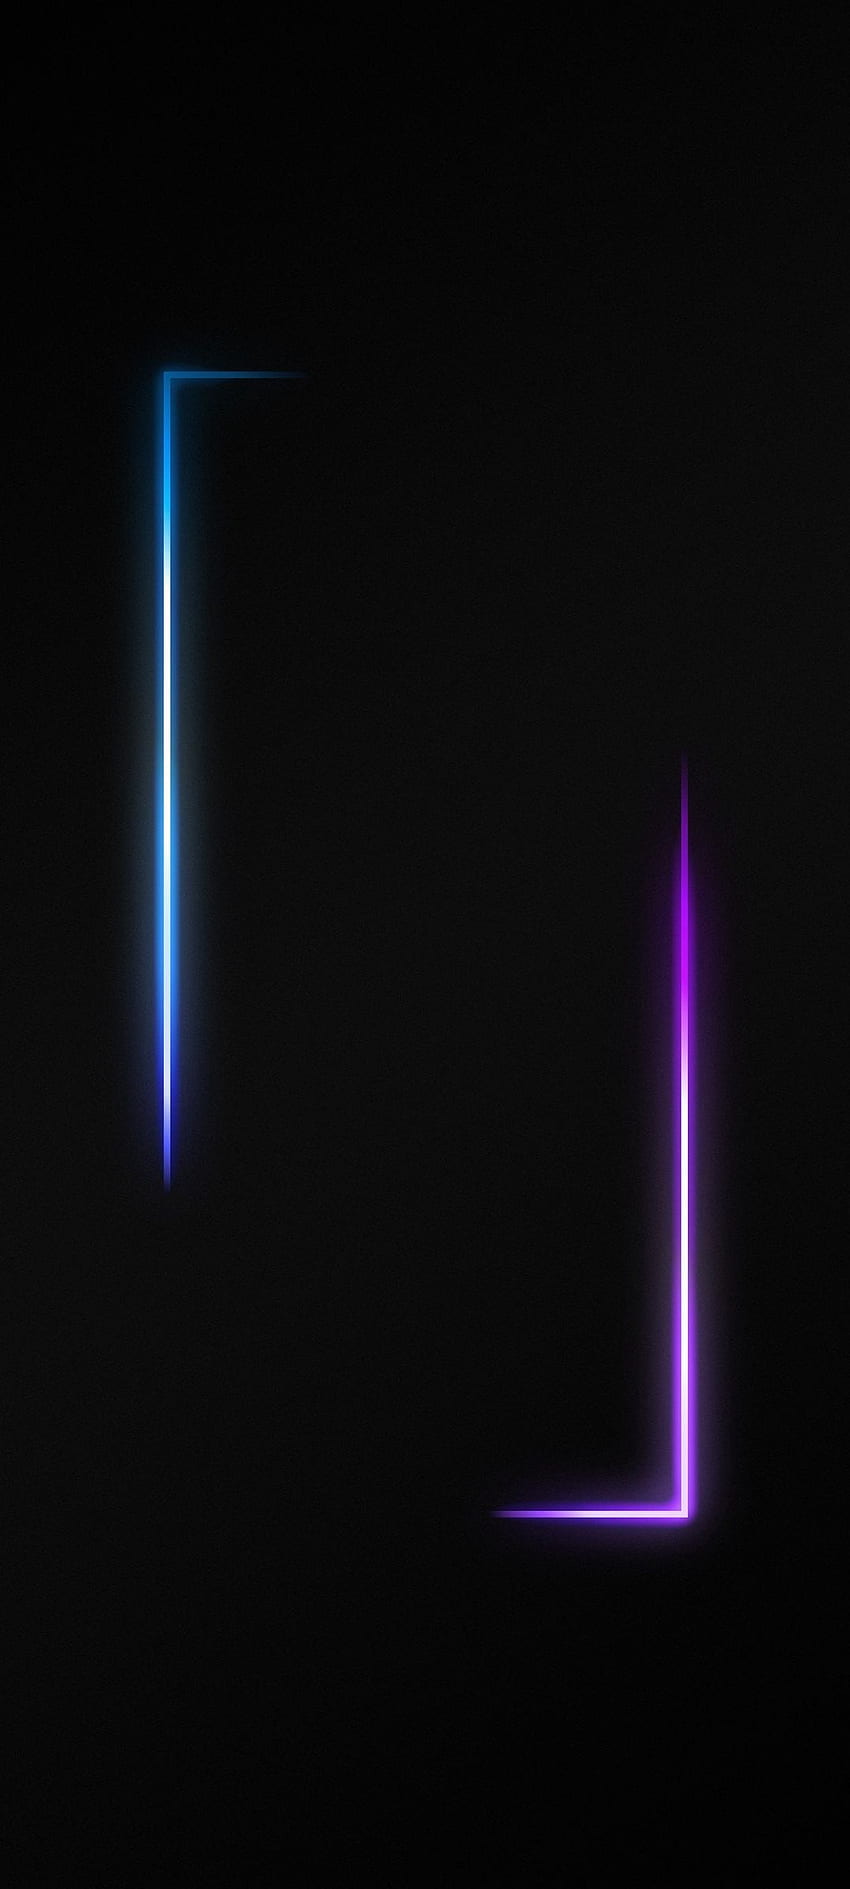 Heres a border light for those who are interested border light iphone HD  phone wallpaper  Pxfuel